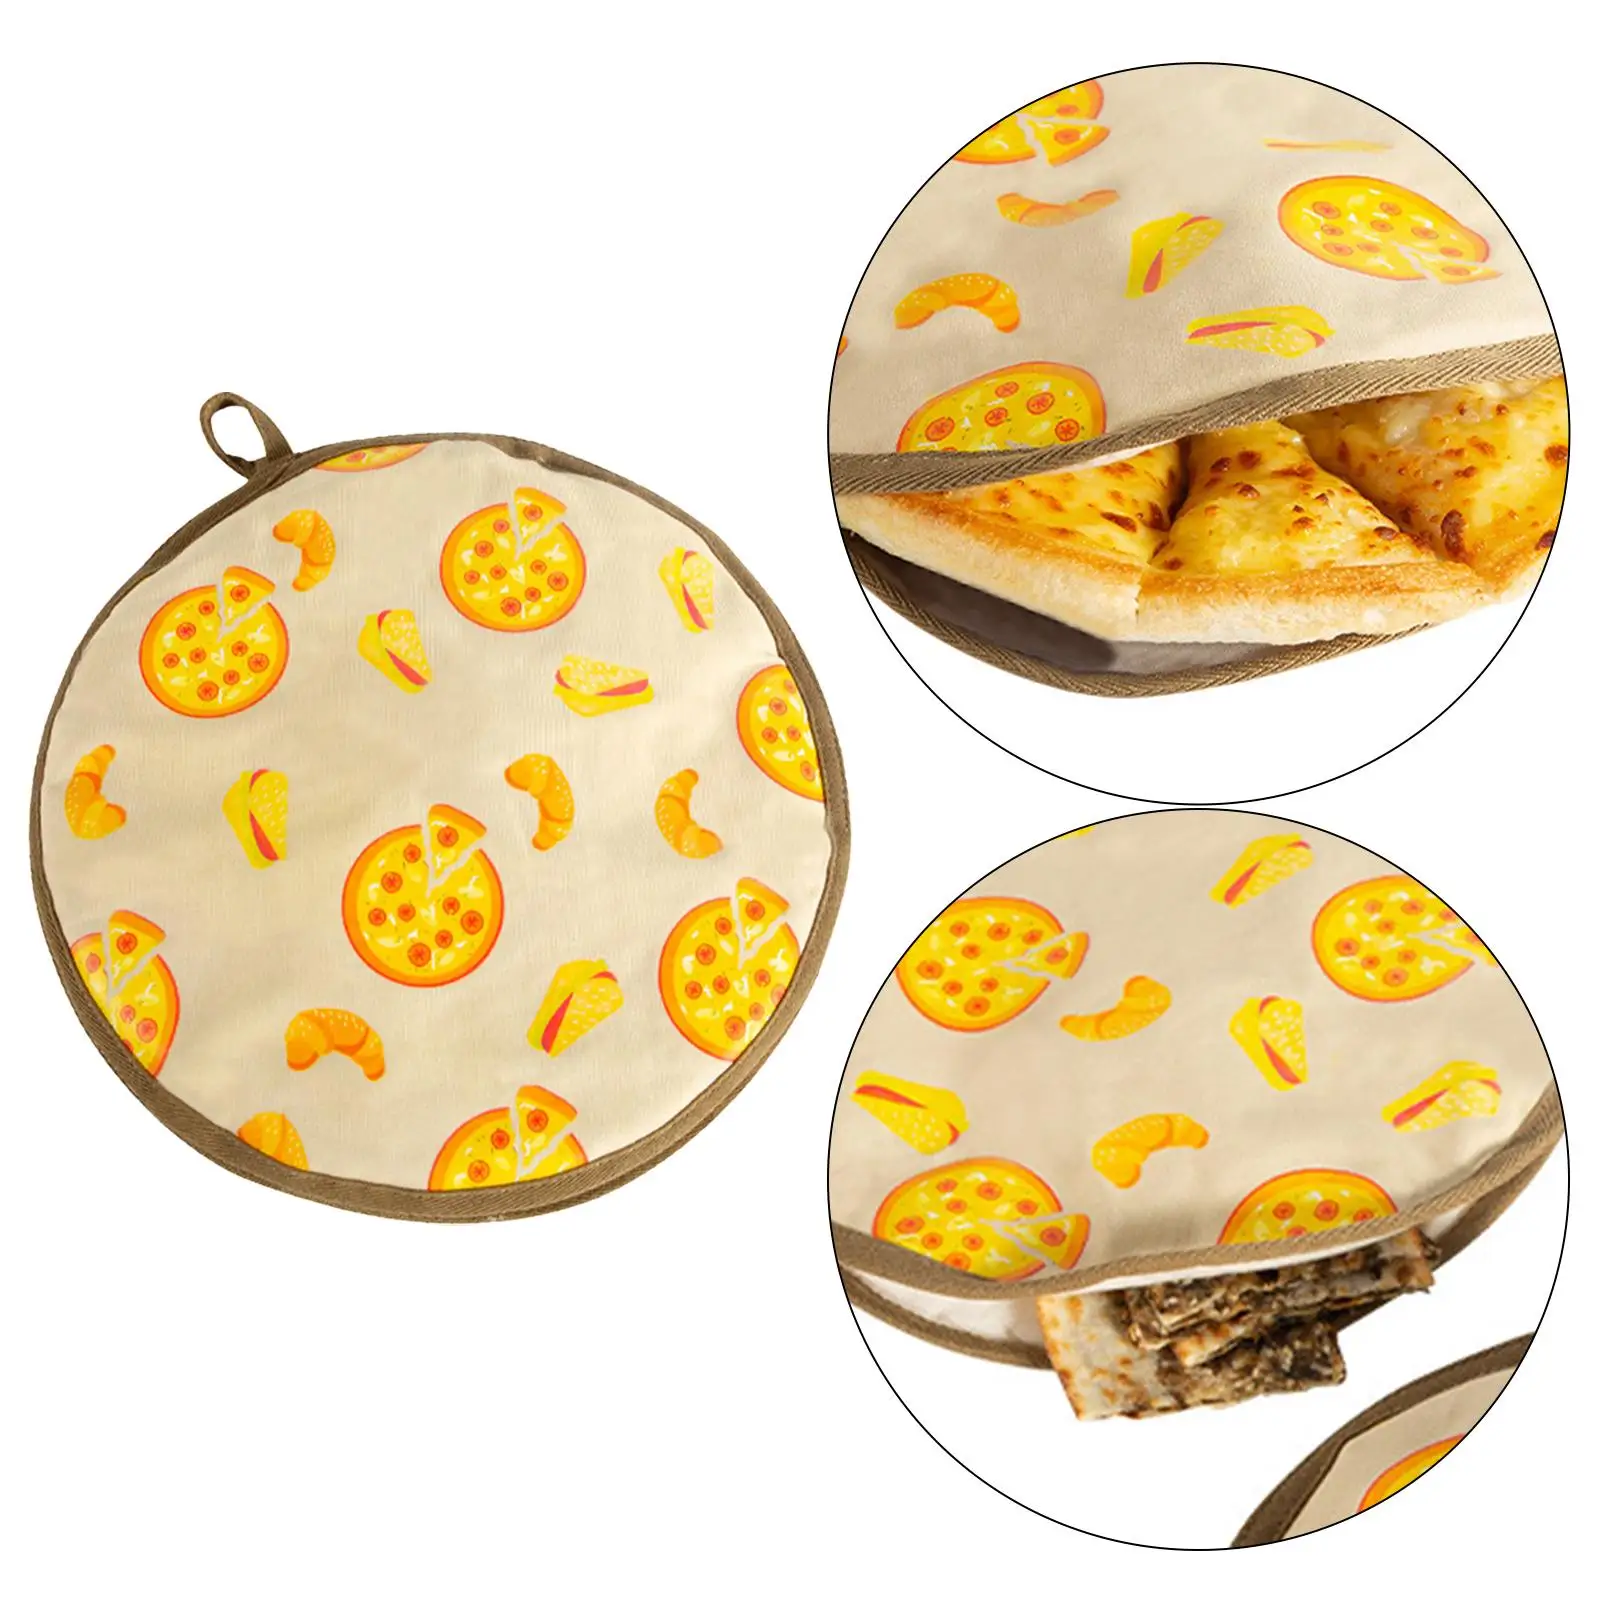 Food Insulation Bag Storage Pouch Pizza Insulation Cover Portable for Picnic